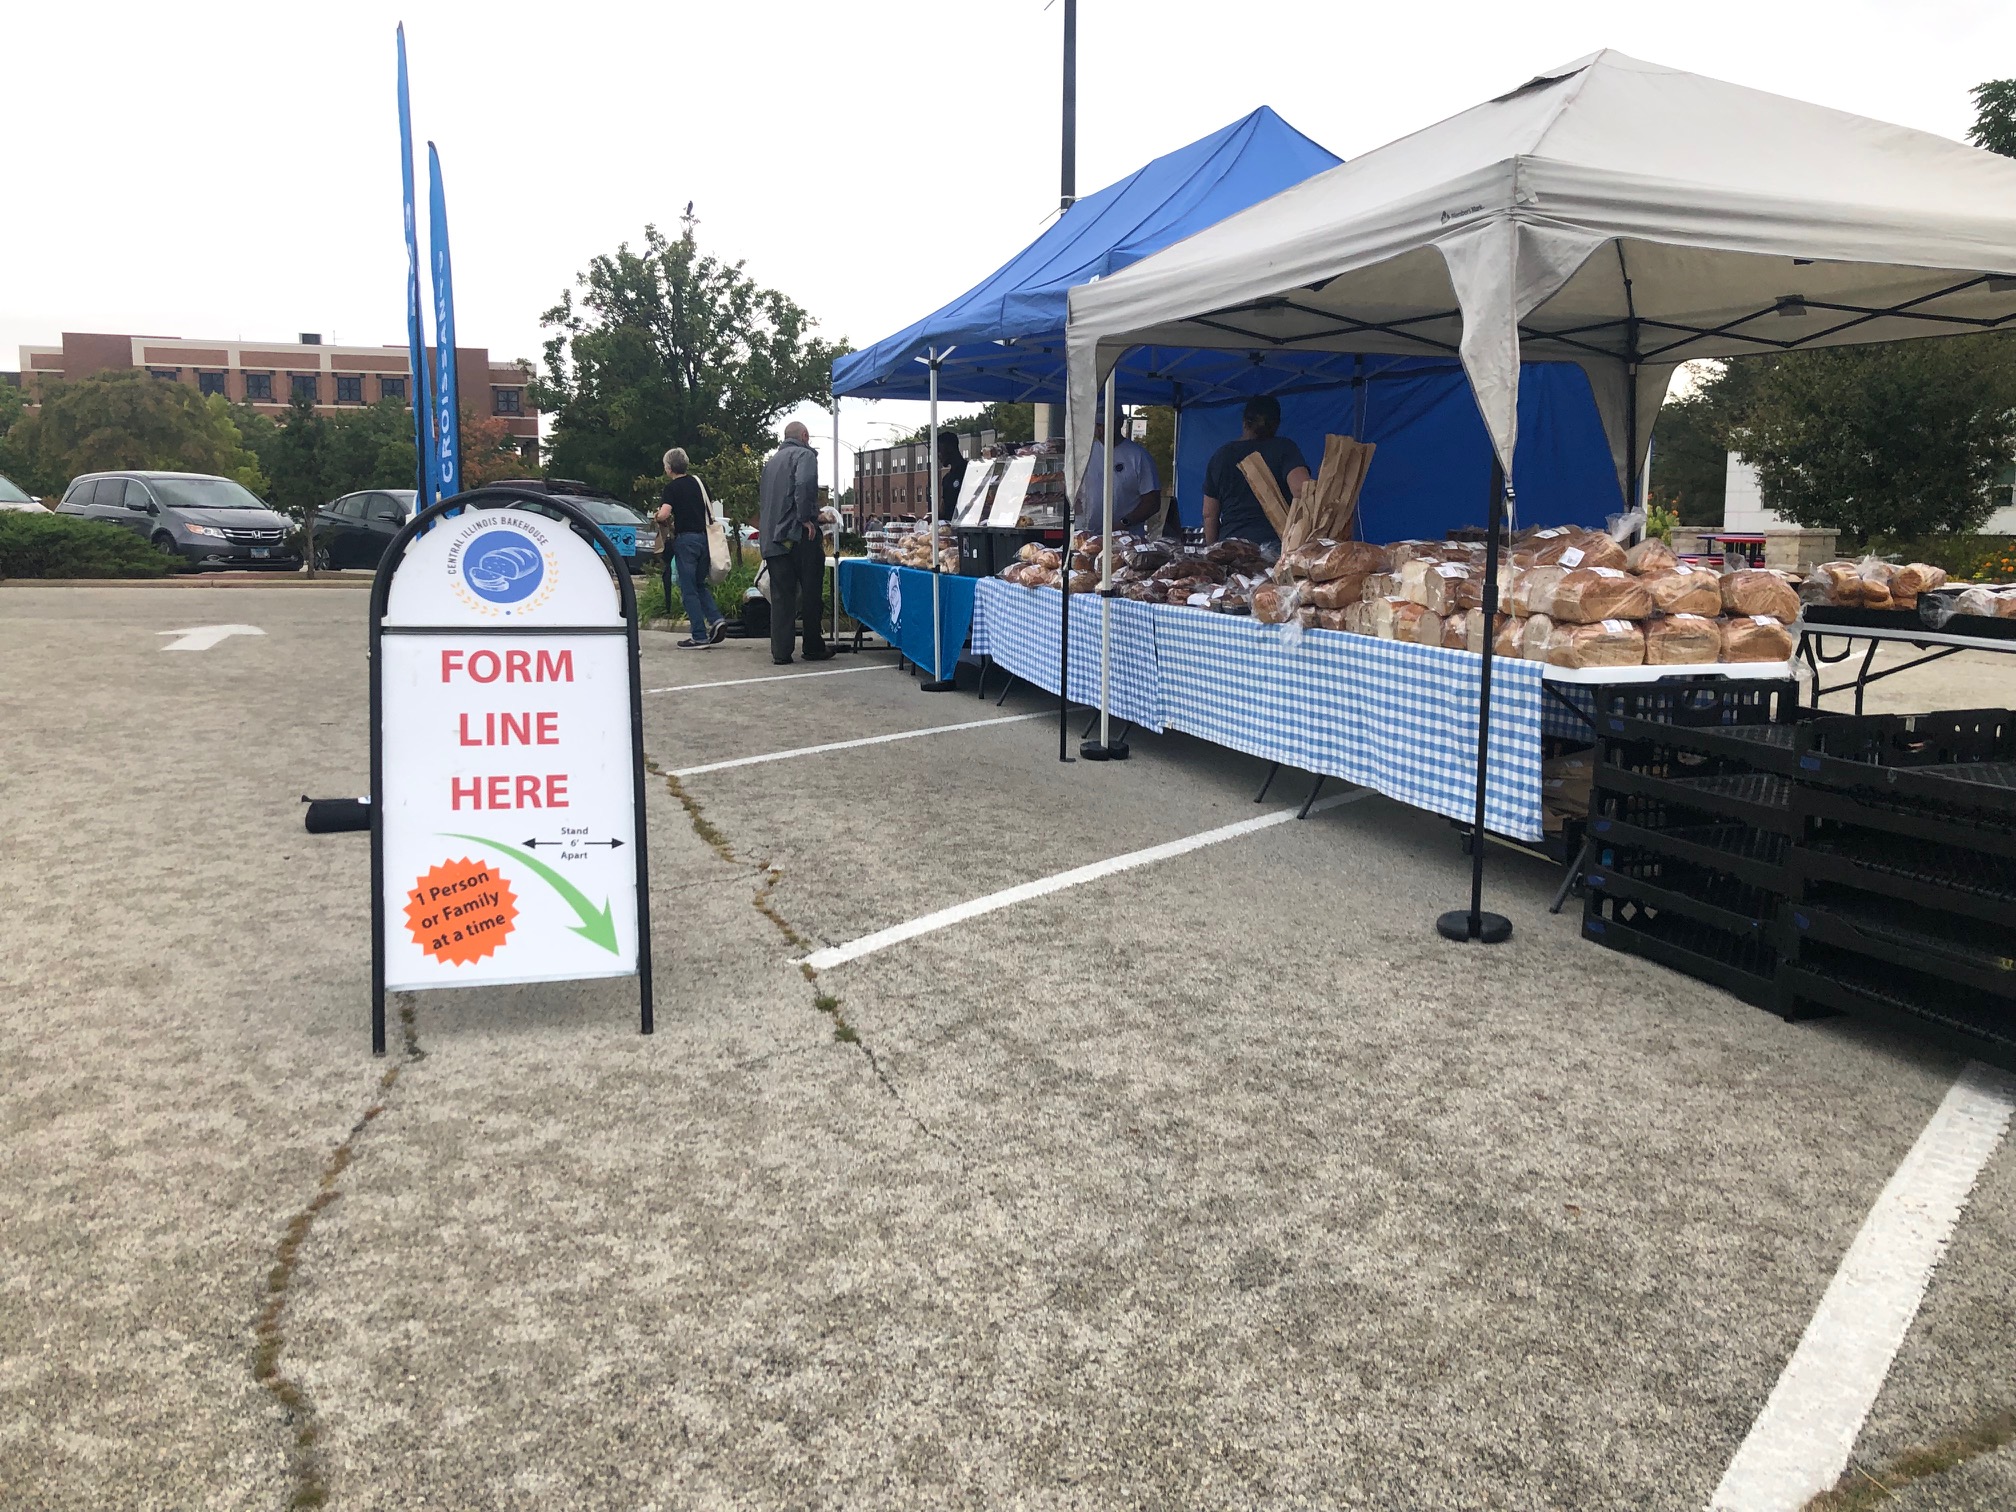 On top of three parking spaces at the Urbana farmers' market, there are blue tents with blue checkerboard tablecloths covered with baked goods and bread. Photo by Alyssa Buckley.